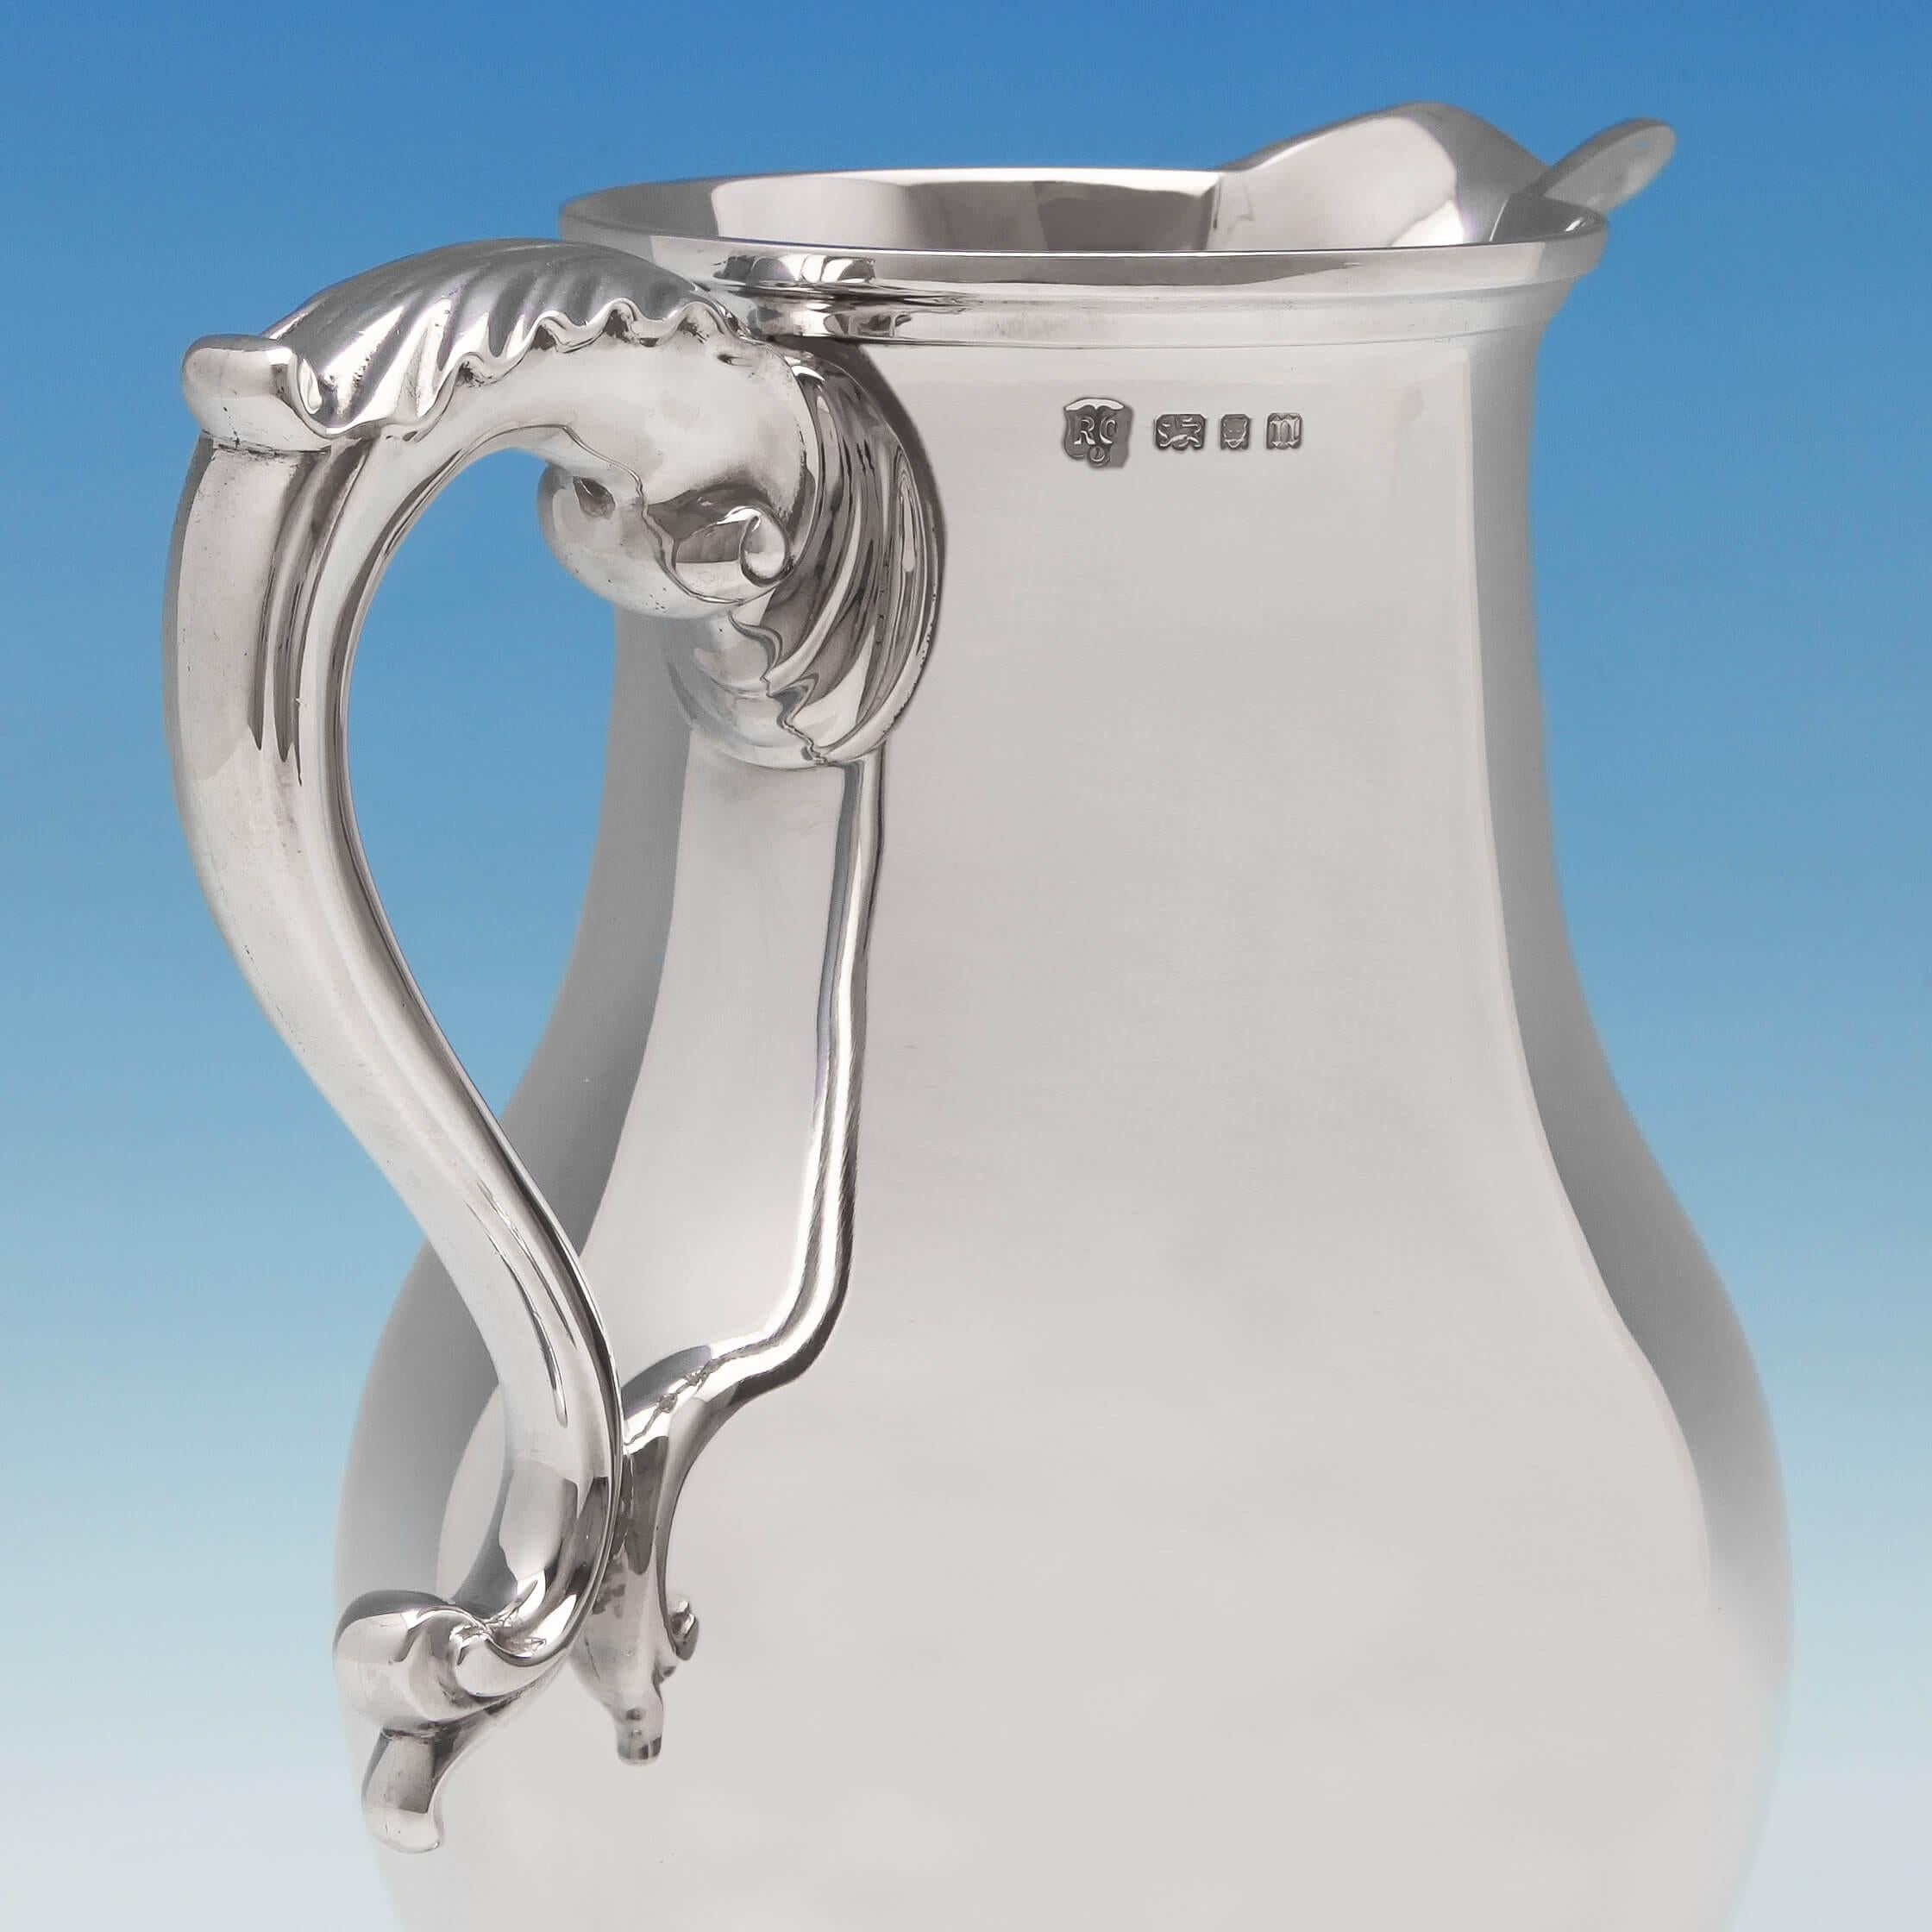 Hallmarked in London in 1928 by Richard Comyns, this fantastic sterling silver water jug is in the style of a Classic George III Beer jug, with a baluster body, acanthus topped handle, beak spout and pedestal base. 

The jug measures 9.5